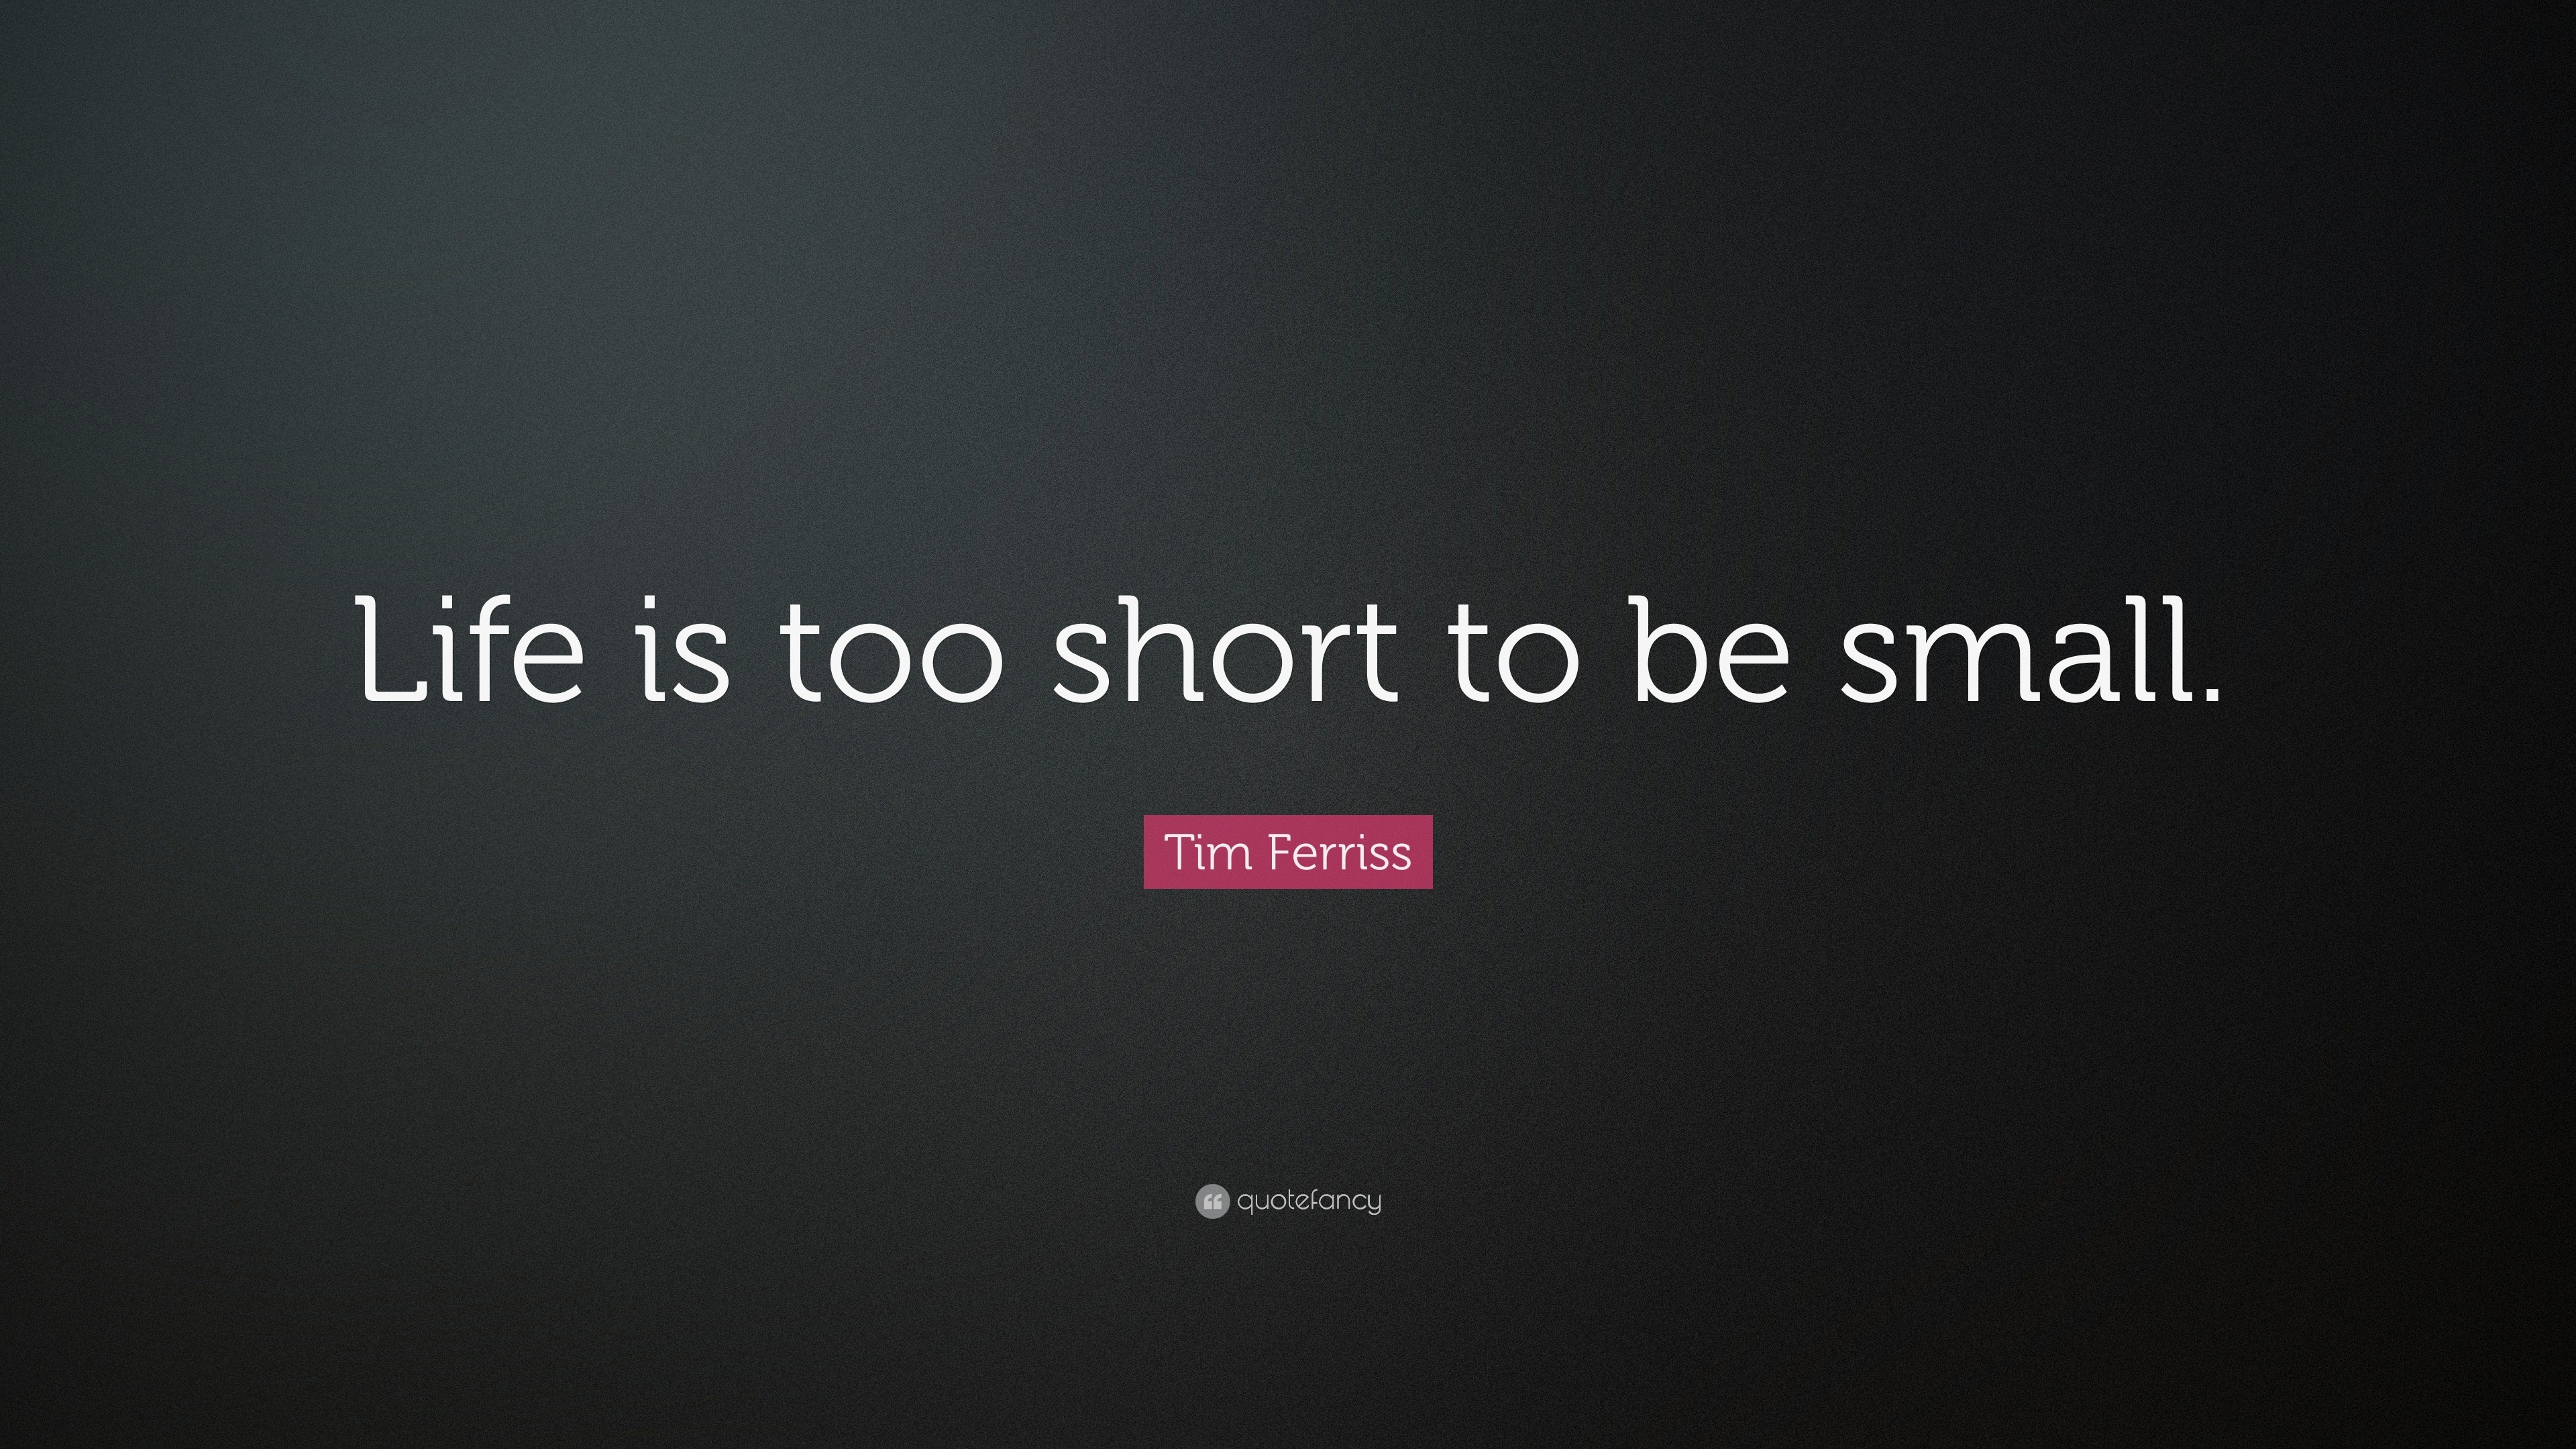 Tim Ferriss Quote: “Life is too short to be small.”